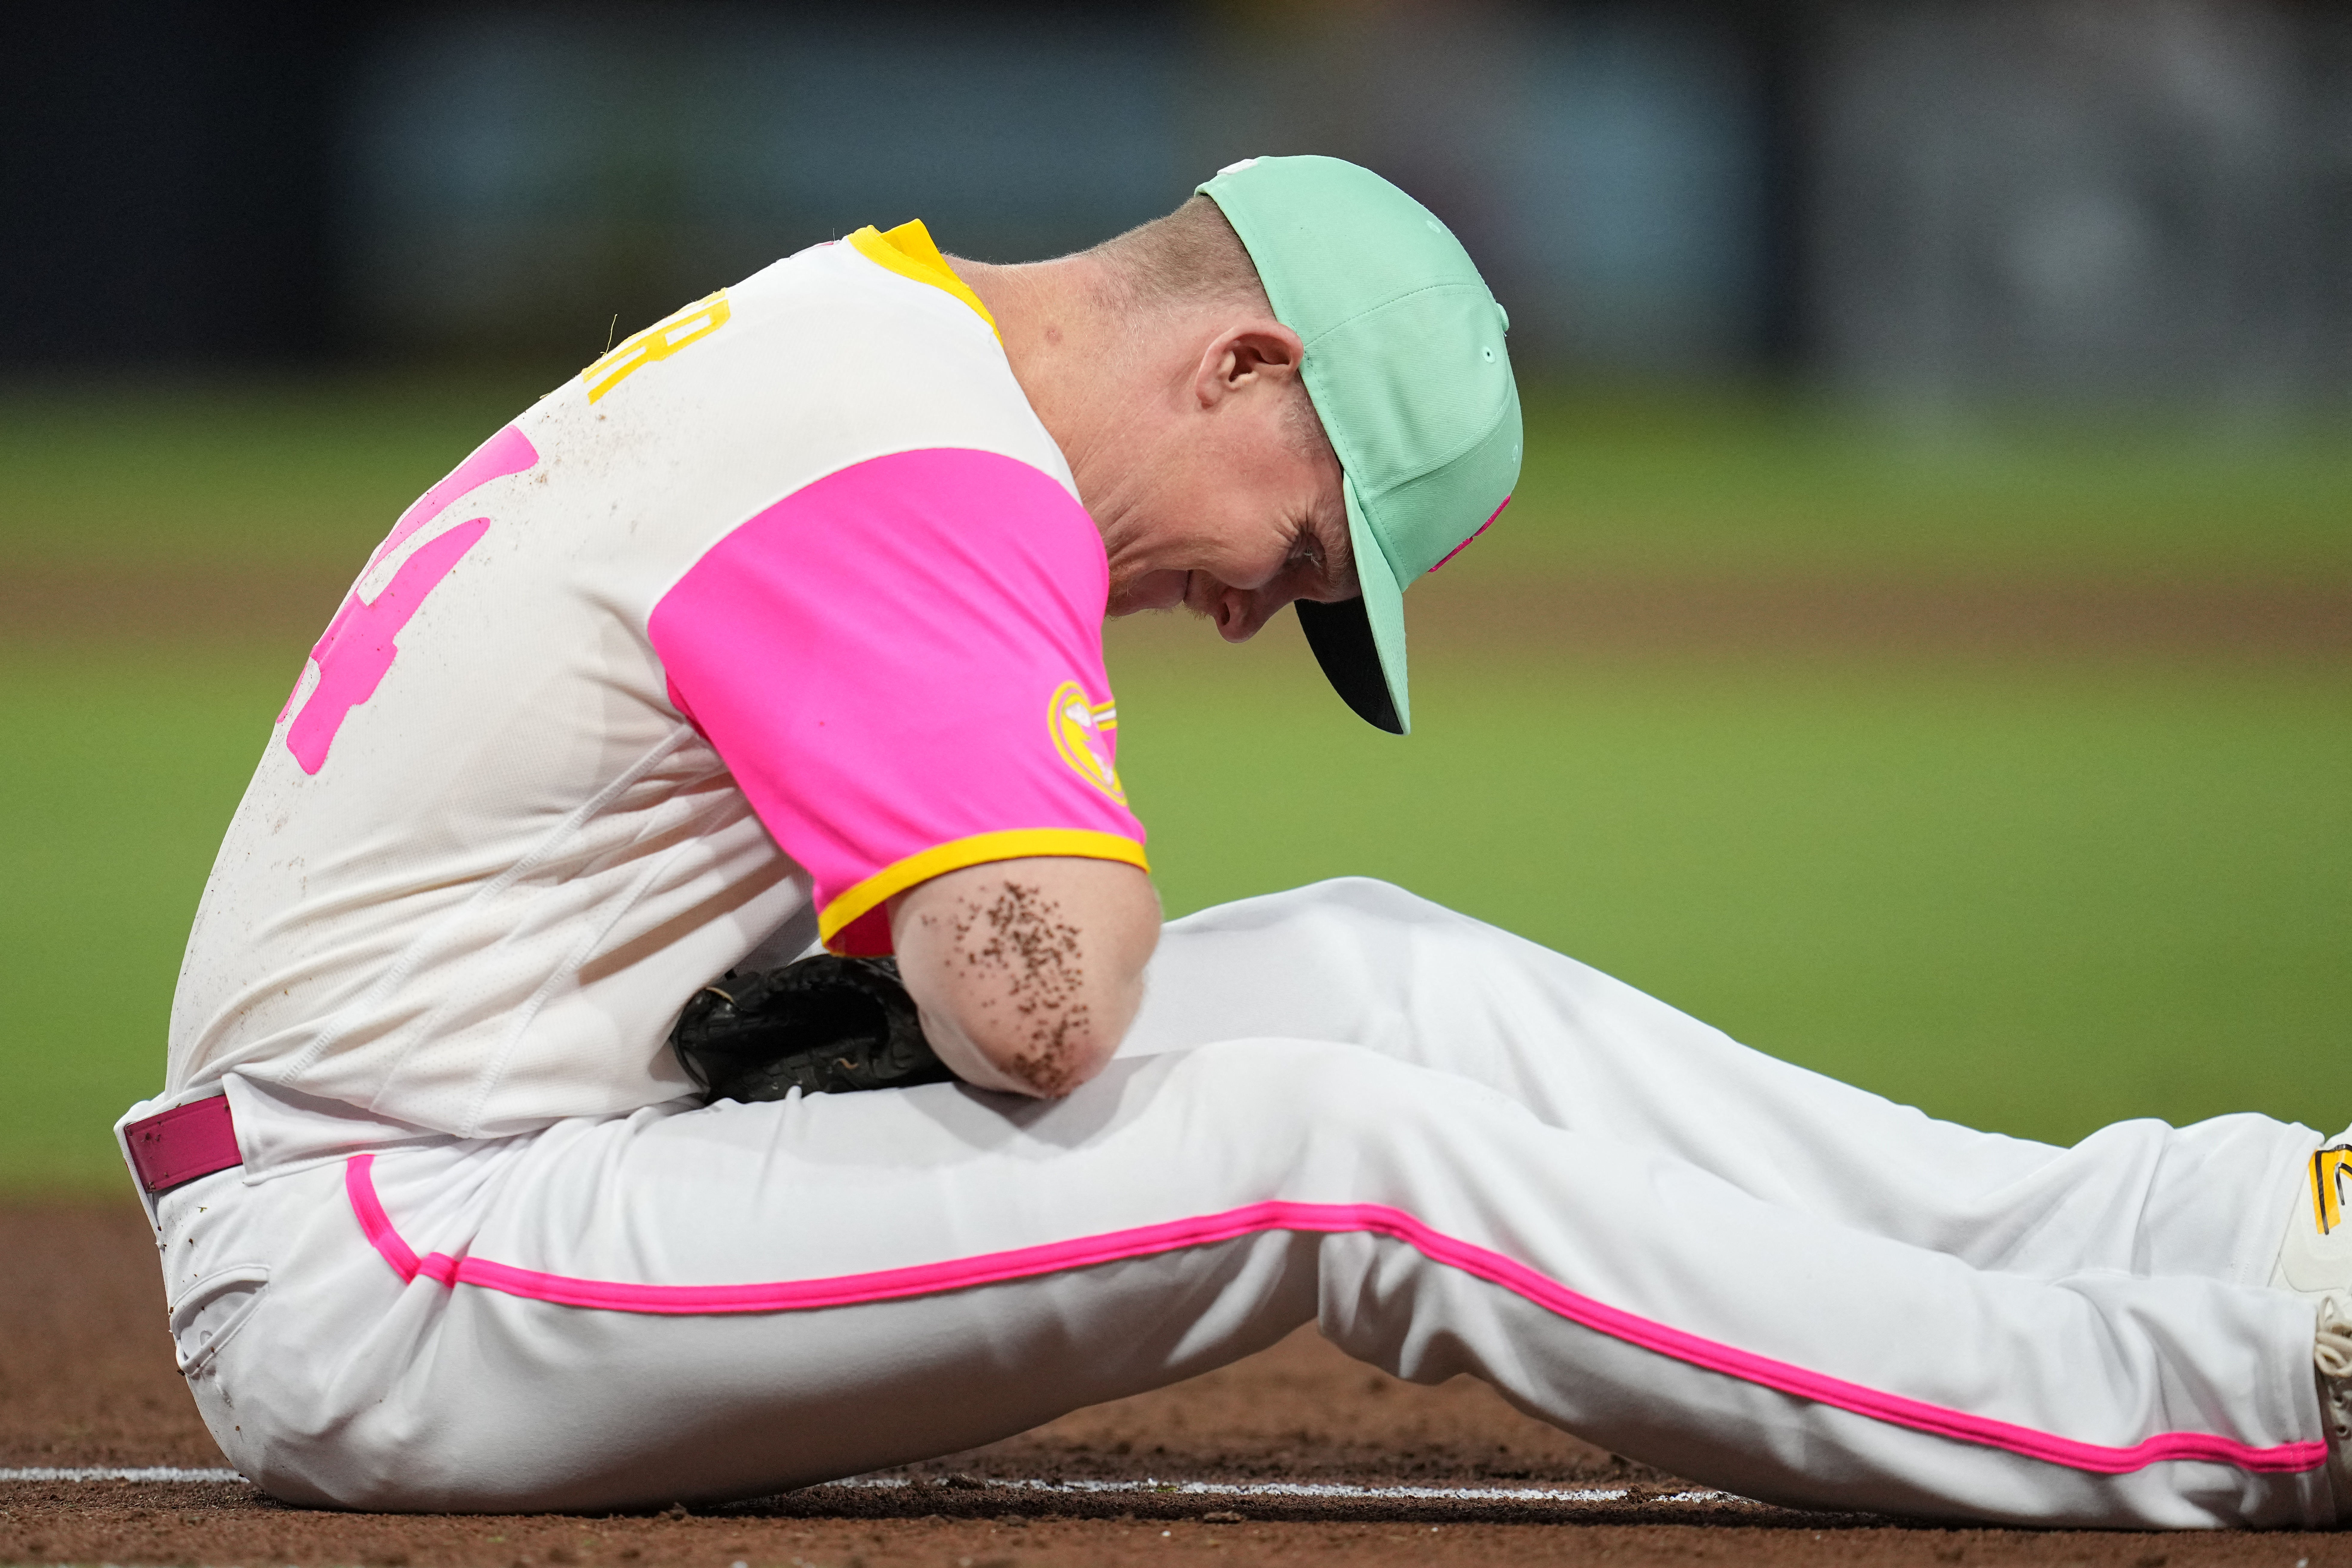 What are the days of the year that the MLB players wear pink?